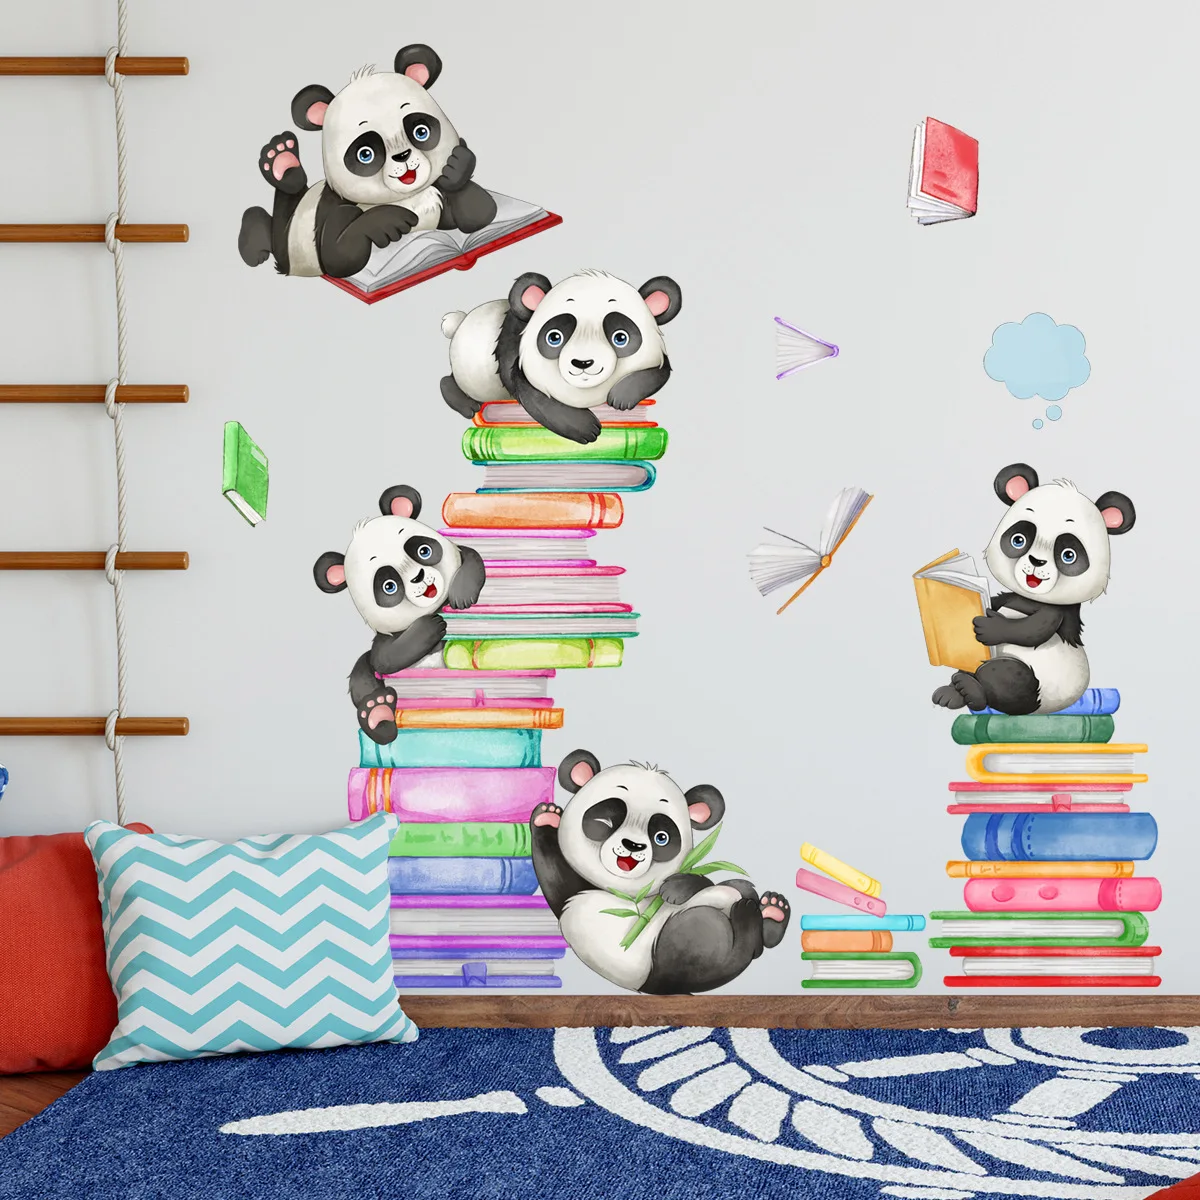 2pcs Animal Panda Book Cartoon Wall Stickers Dormitory Background Wall Home Decoration Wall Stickers Mural Wallpaper Ms6263 2pcs cartoon cat little fish dried clothes bar wall stickers laundry room bathroom home decoration wall sticker wallpaper ms581